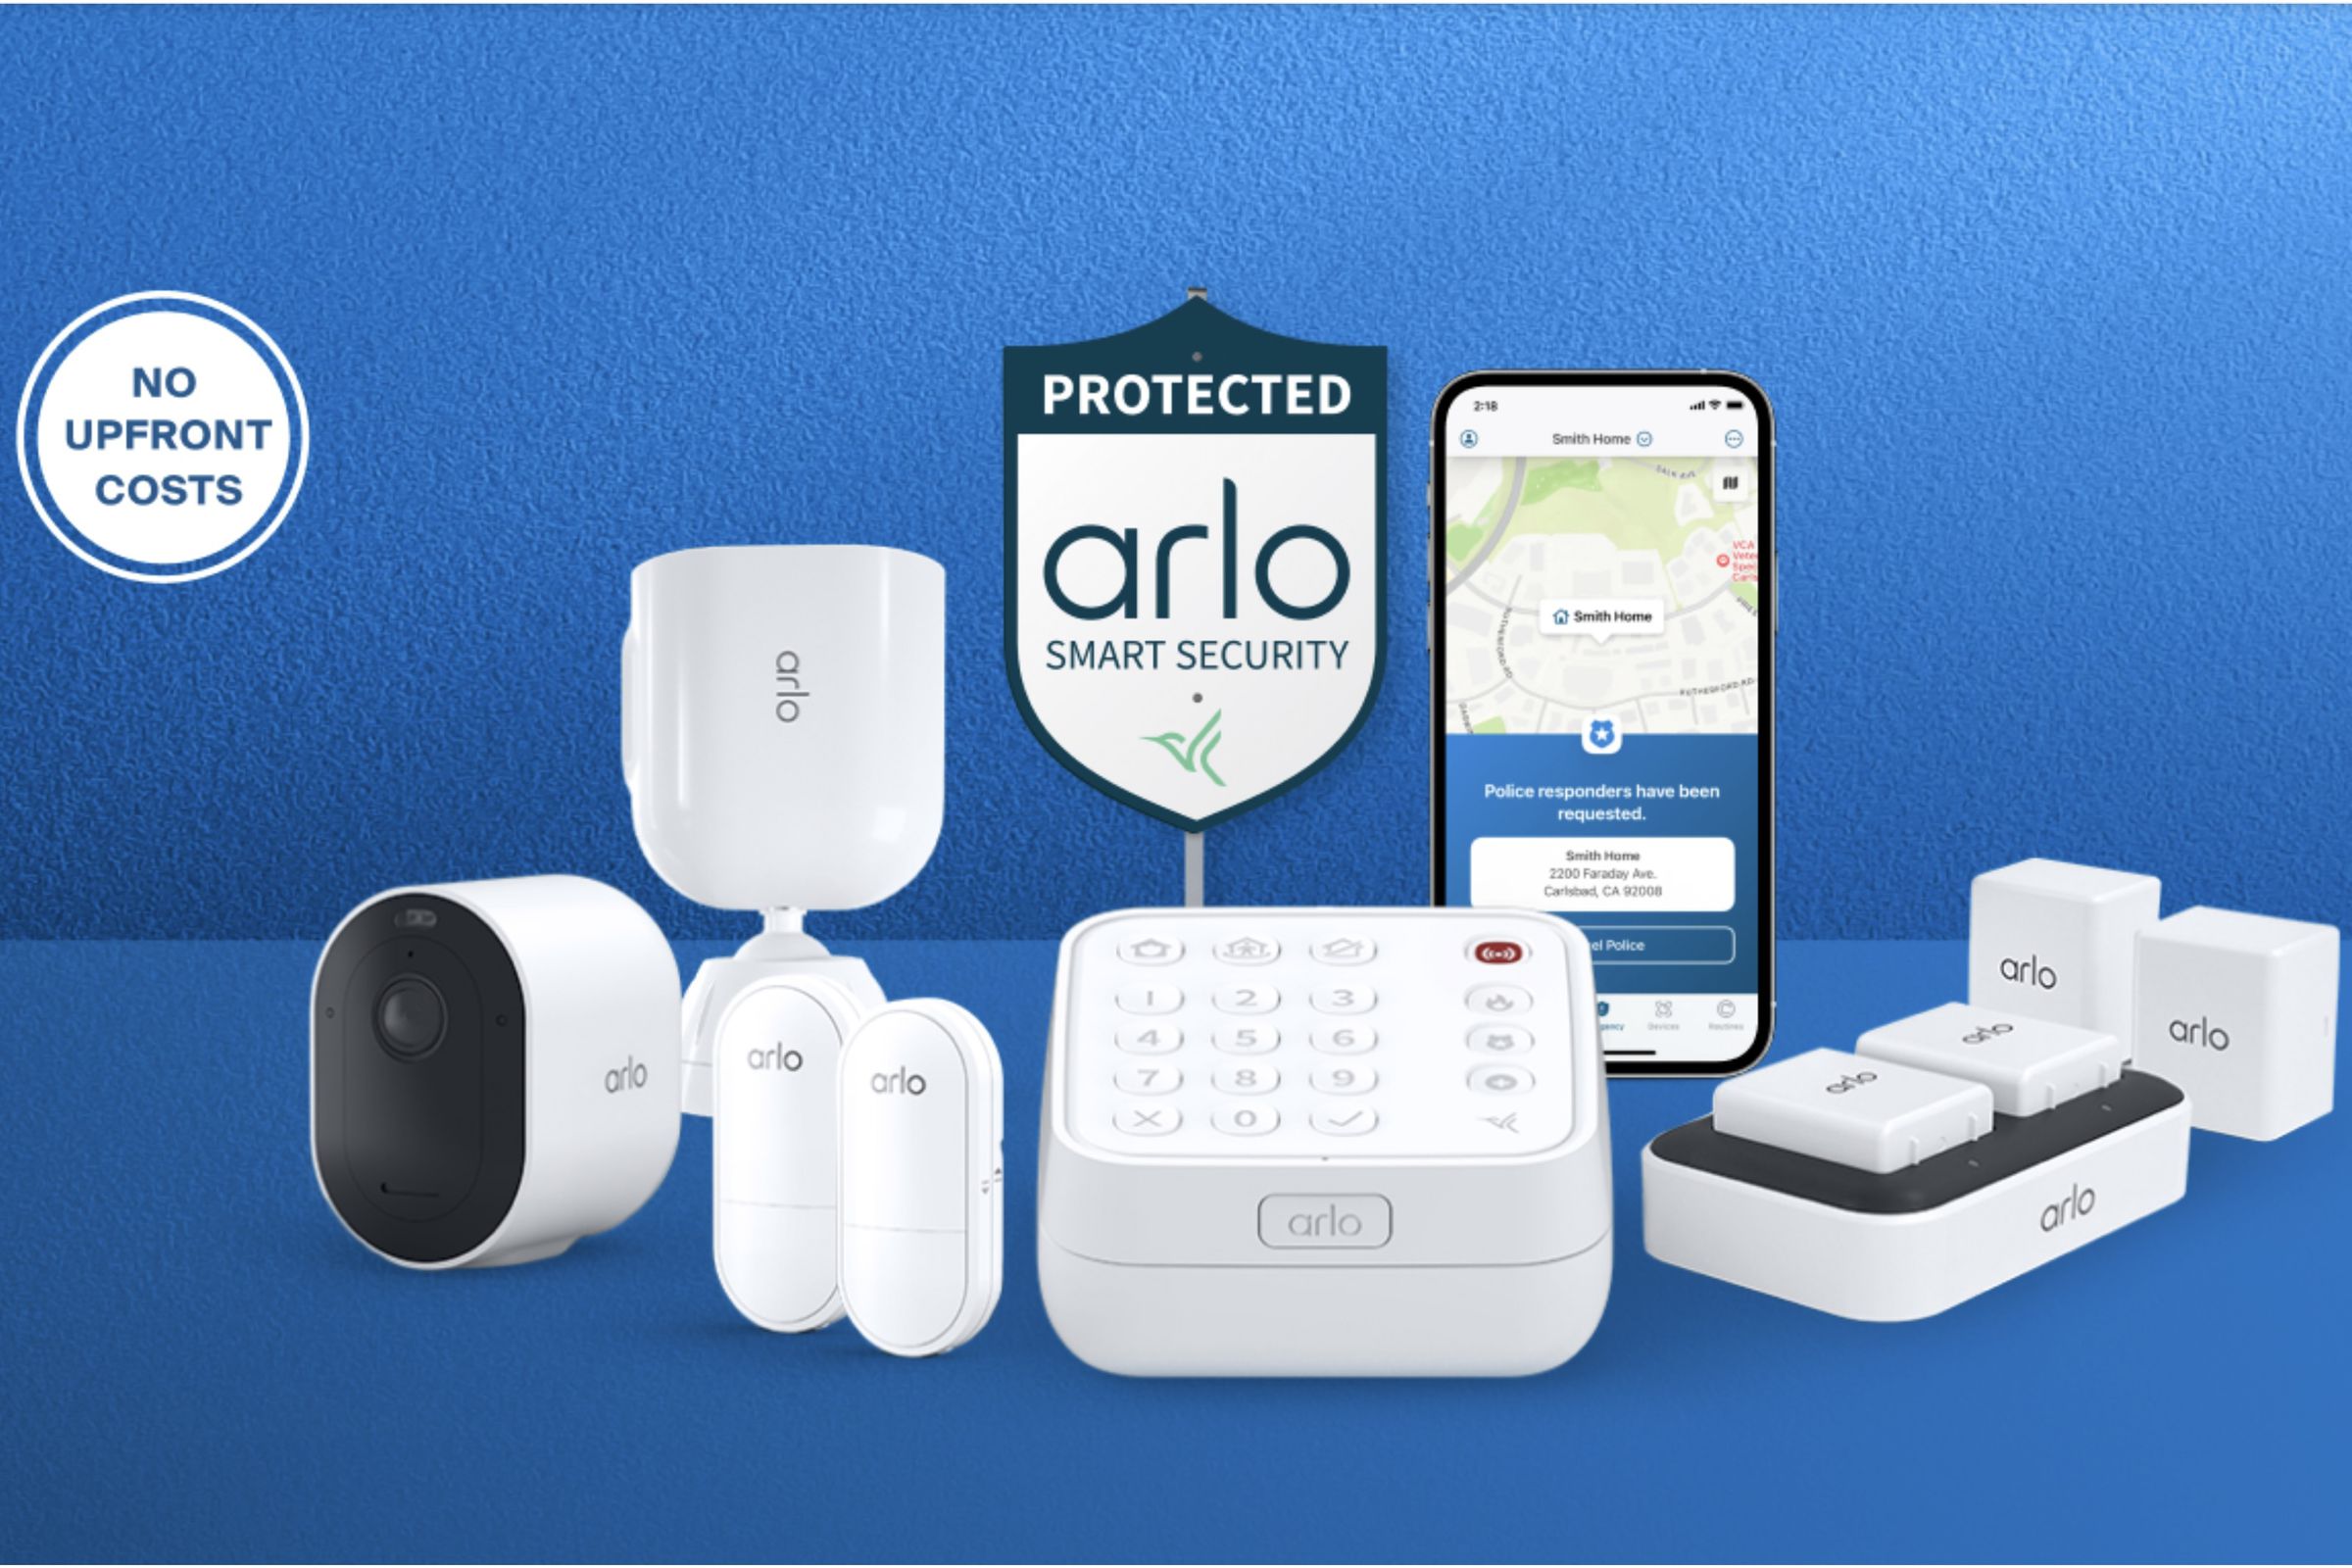 Sign that says protected Arlo smart security, no upfront costs, and pictures of security cameras, sensors, keypad, and batteries.